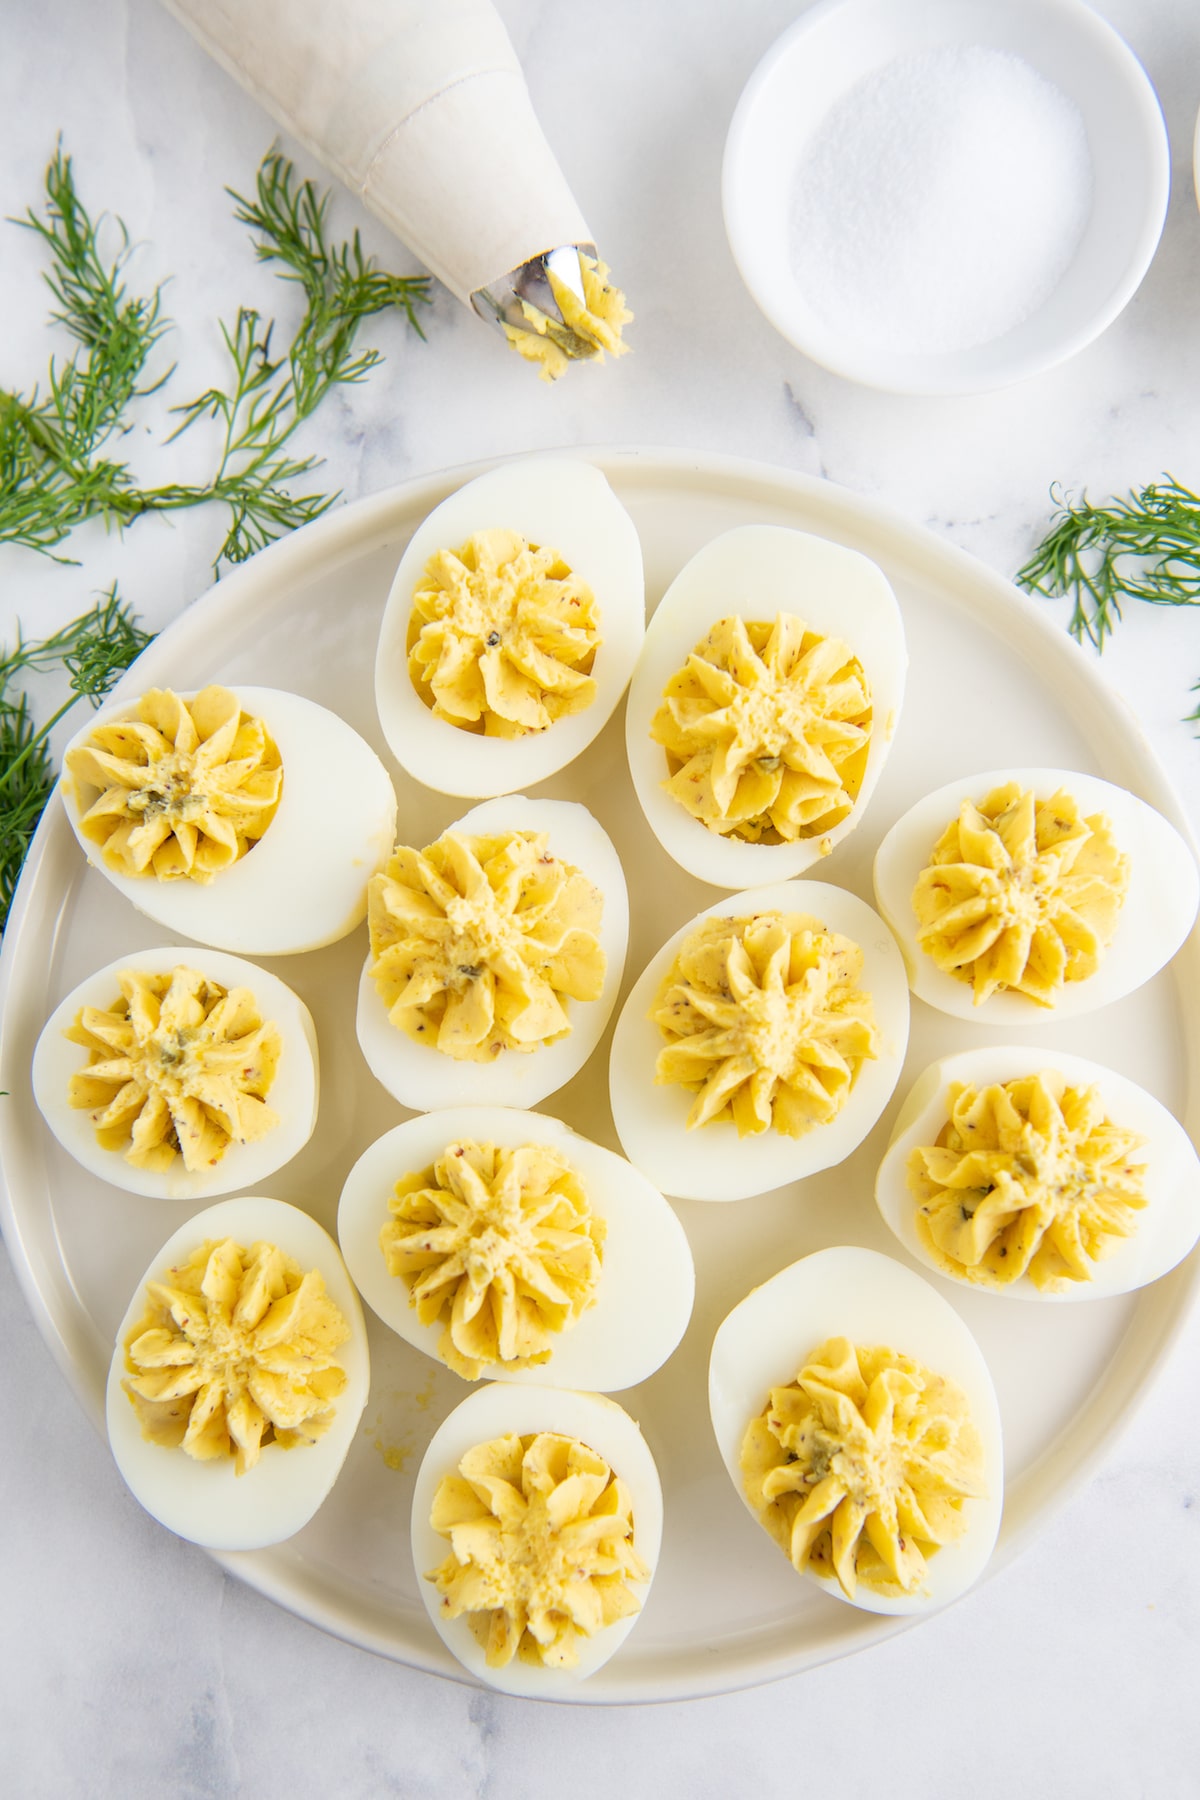 Deviled eggs being filled with deviled egg filling on a white plate.